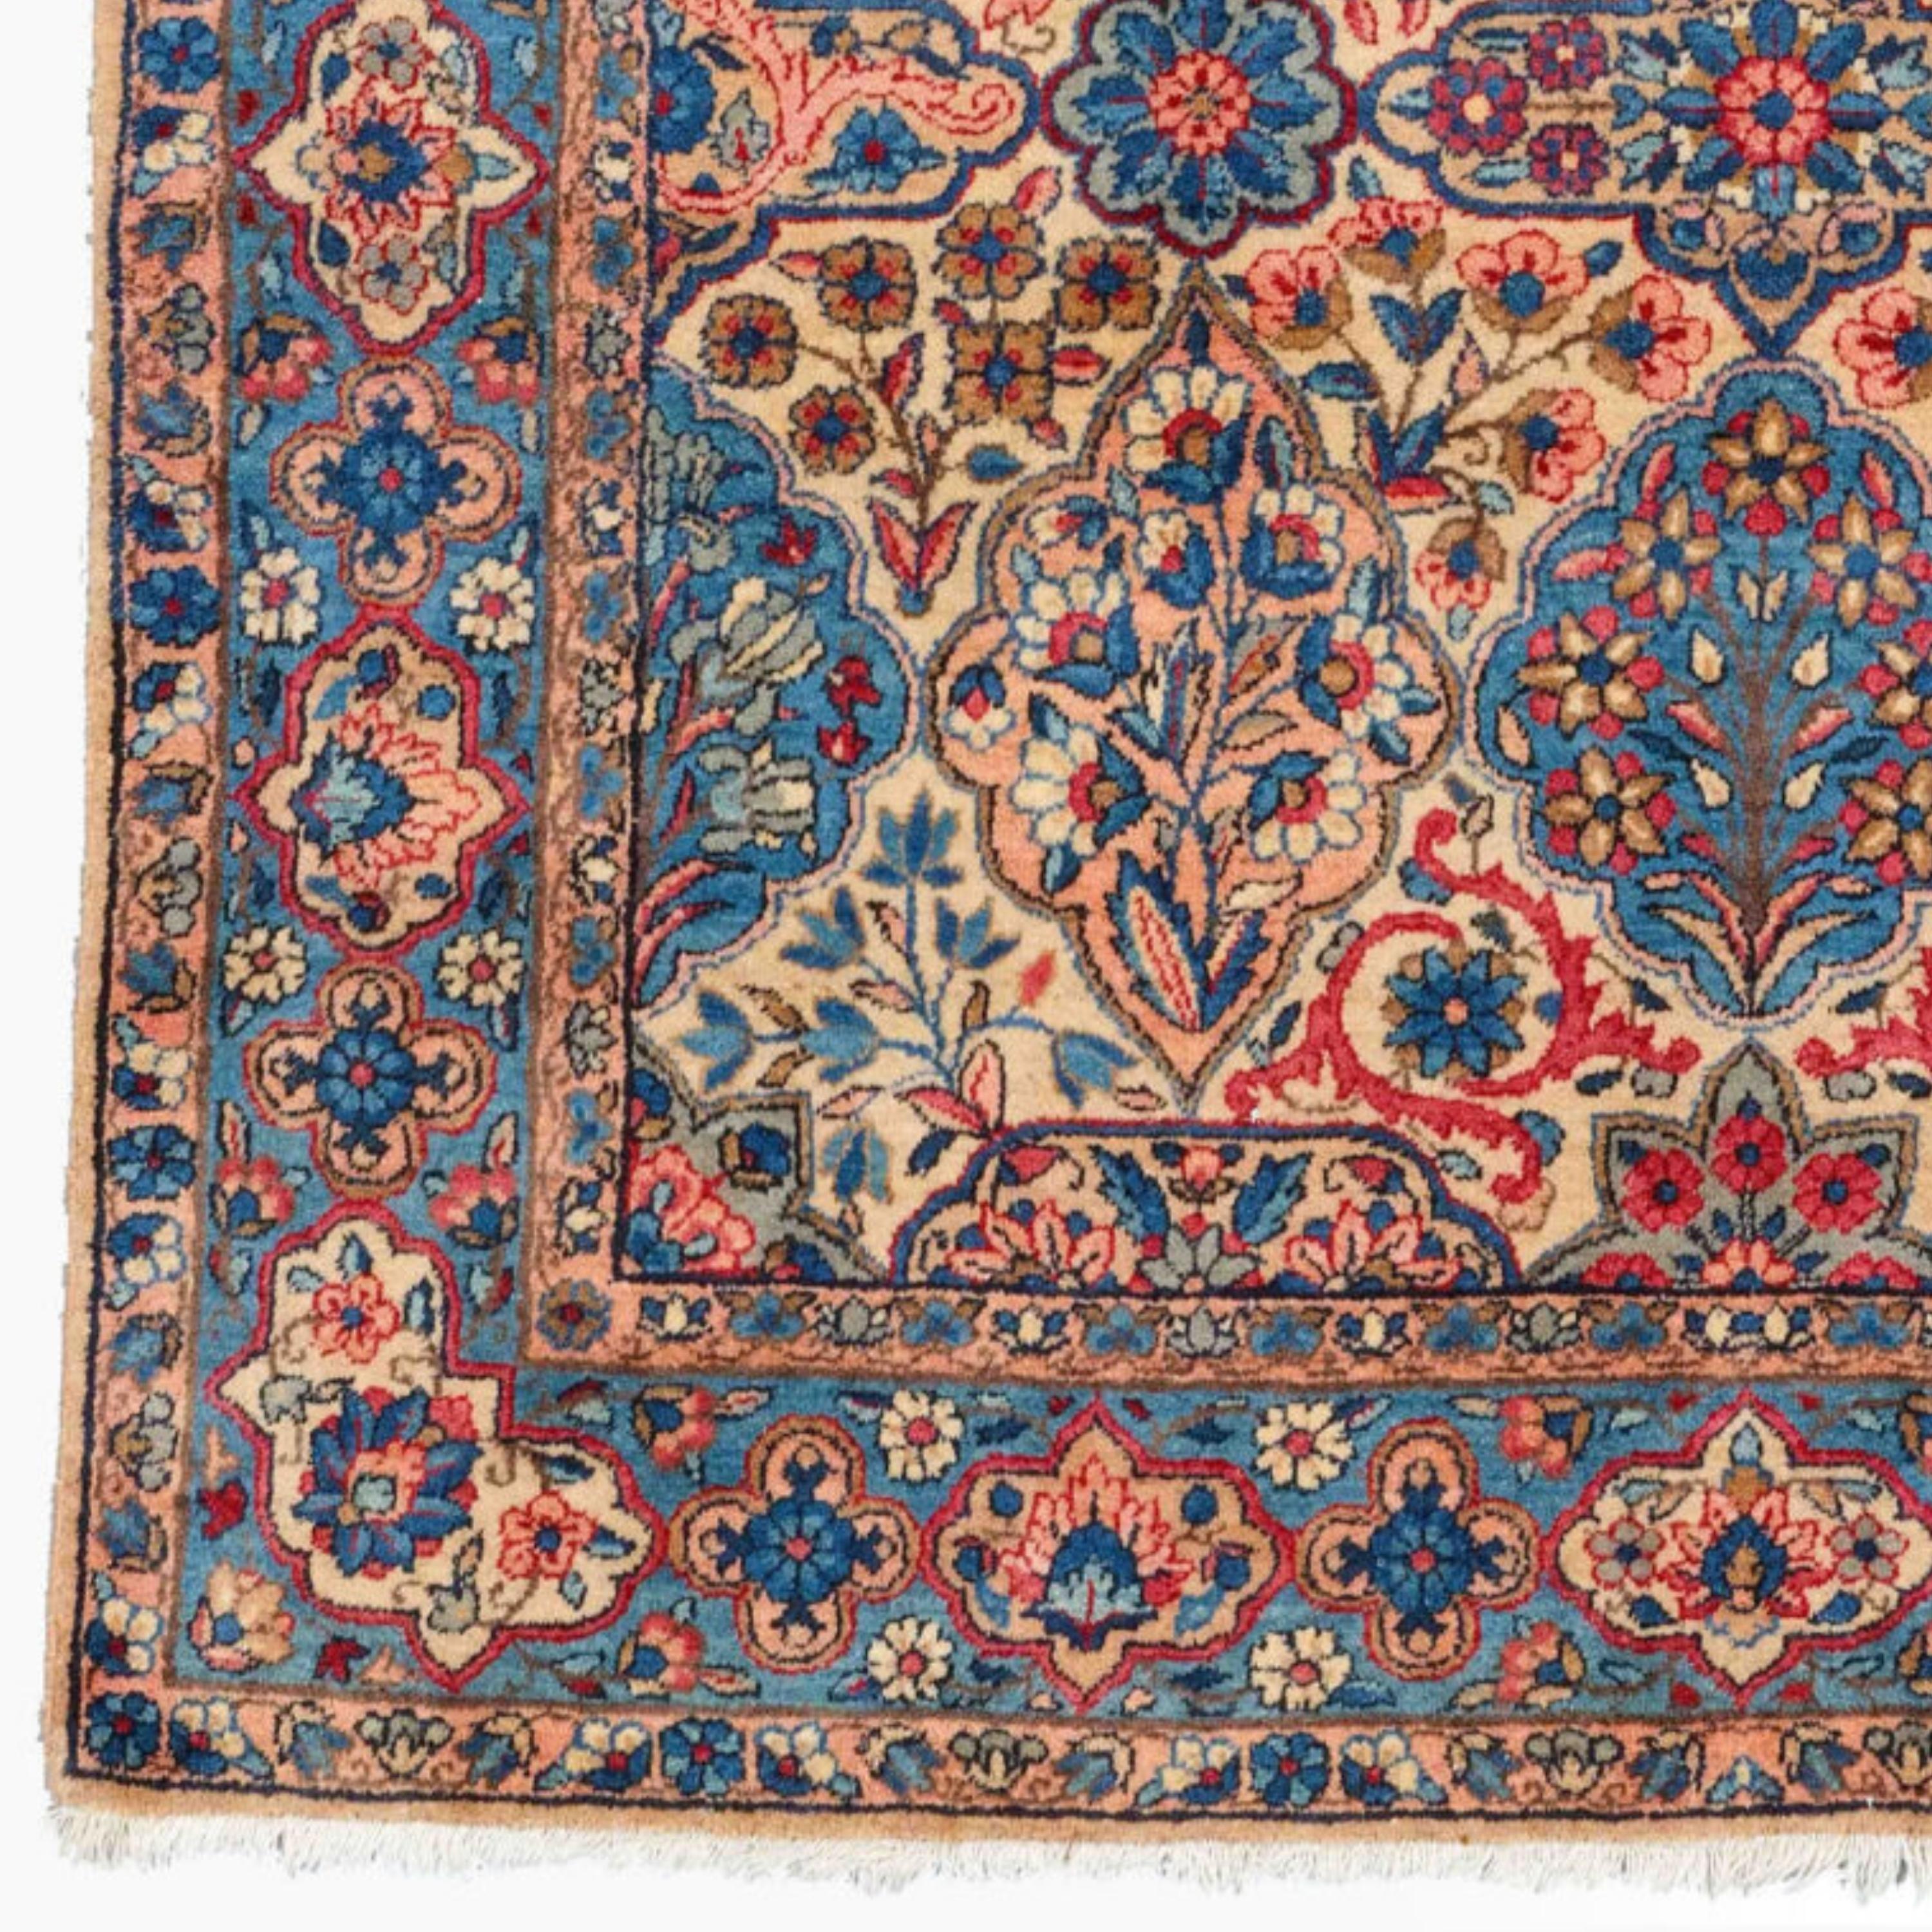 Antique Keshan Rug  Persian Rugs
Late 20th Century Keshan Rug in very good condition
Size 117 x 210 cm (46x82,6 In)

This antique Keşan carpet, which will add both warmth and elegance to your home, was hand-woven in the late 20th century. Its rich